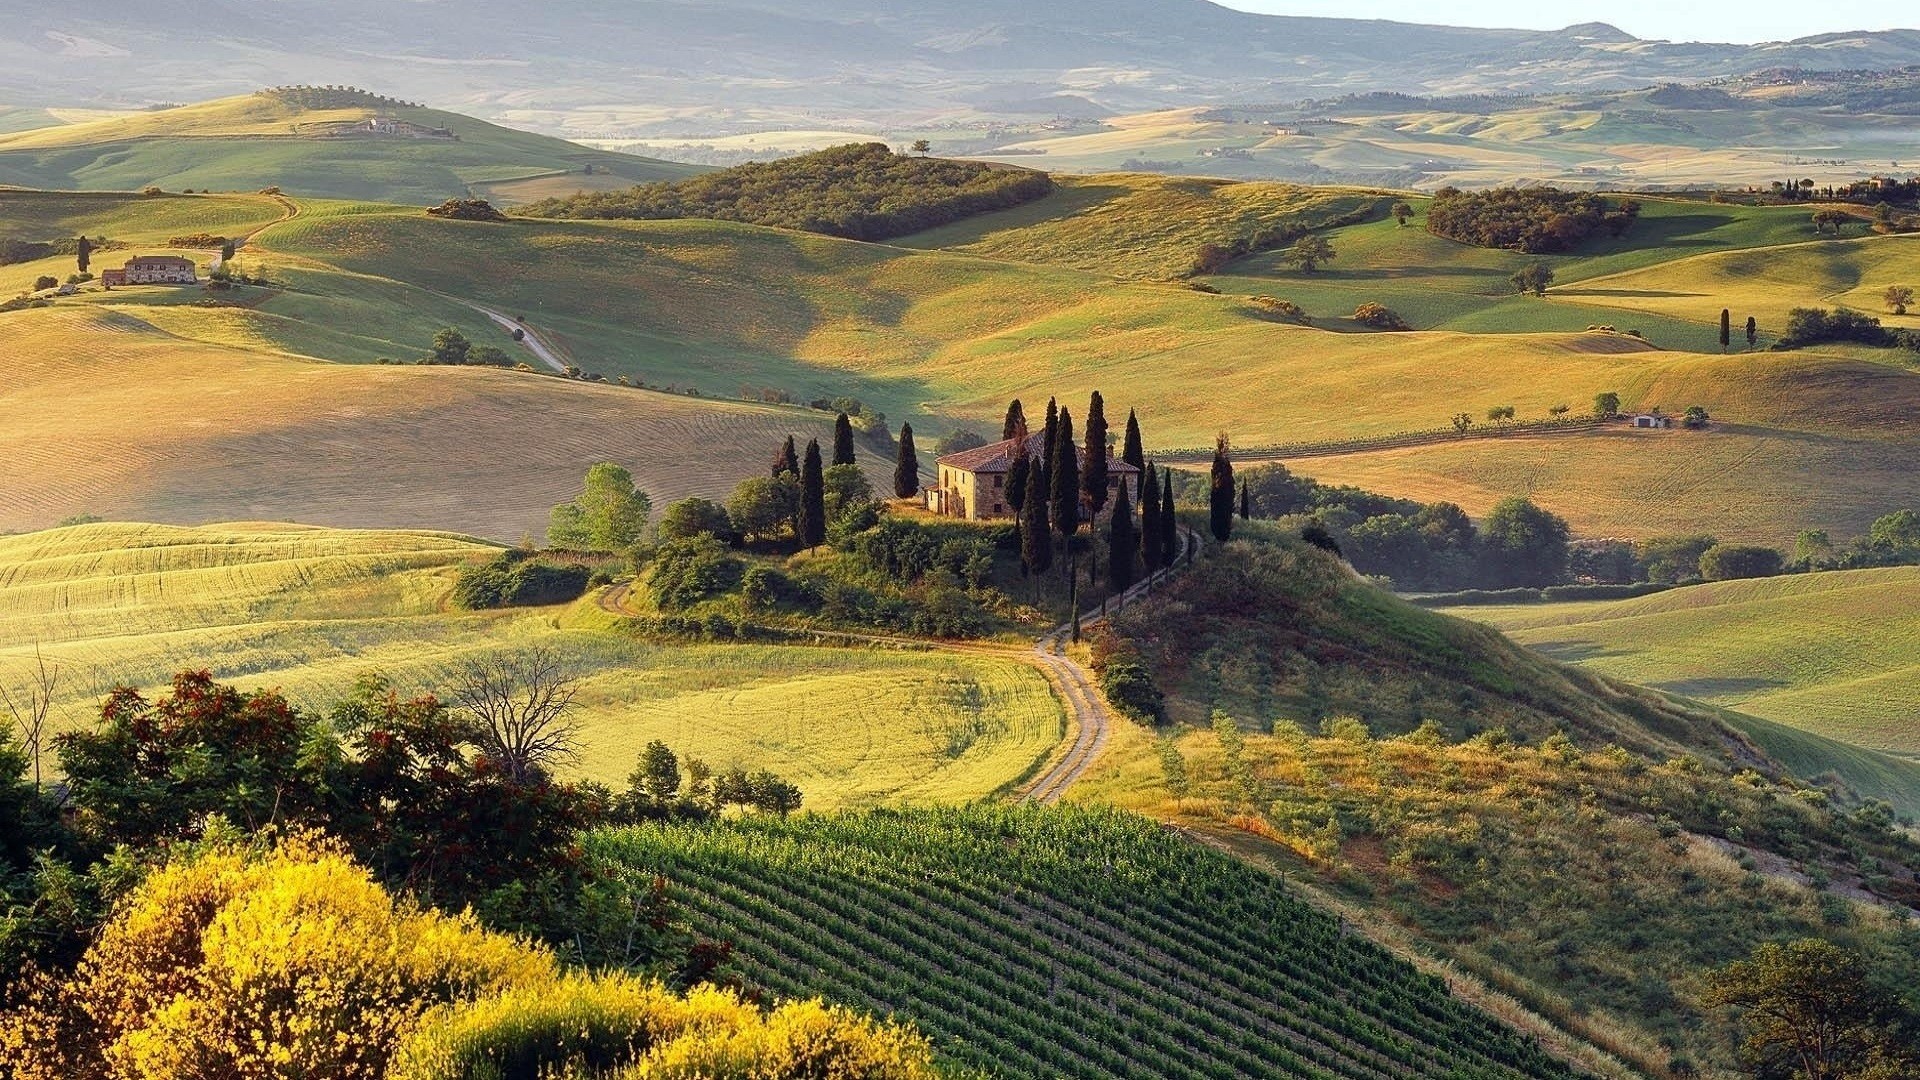 General 1920x1080 nature landscape Italy field hills Tuscany